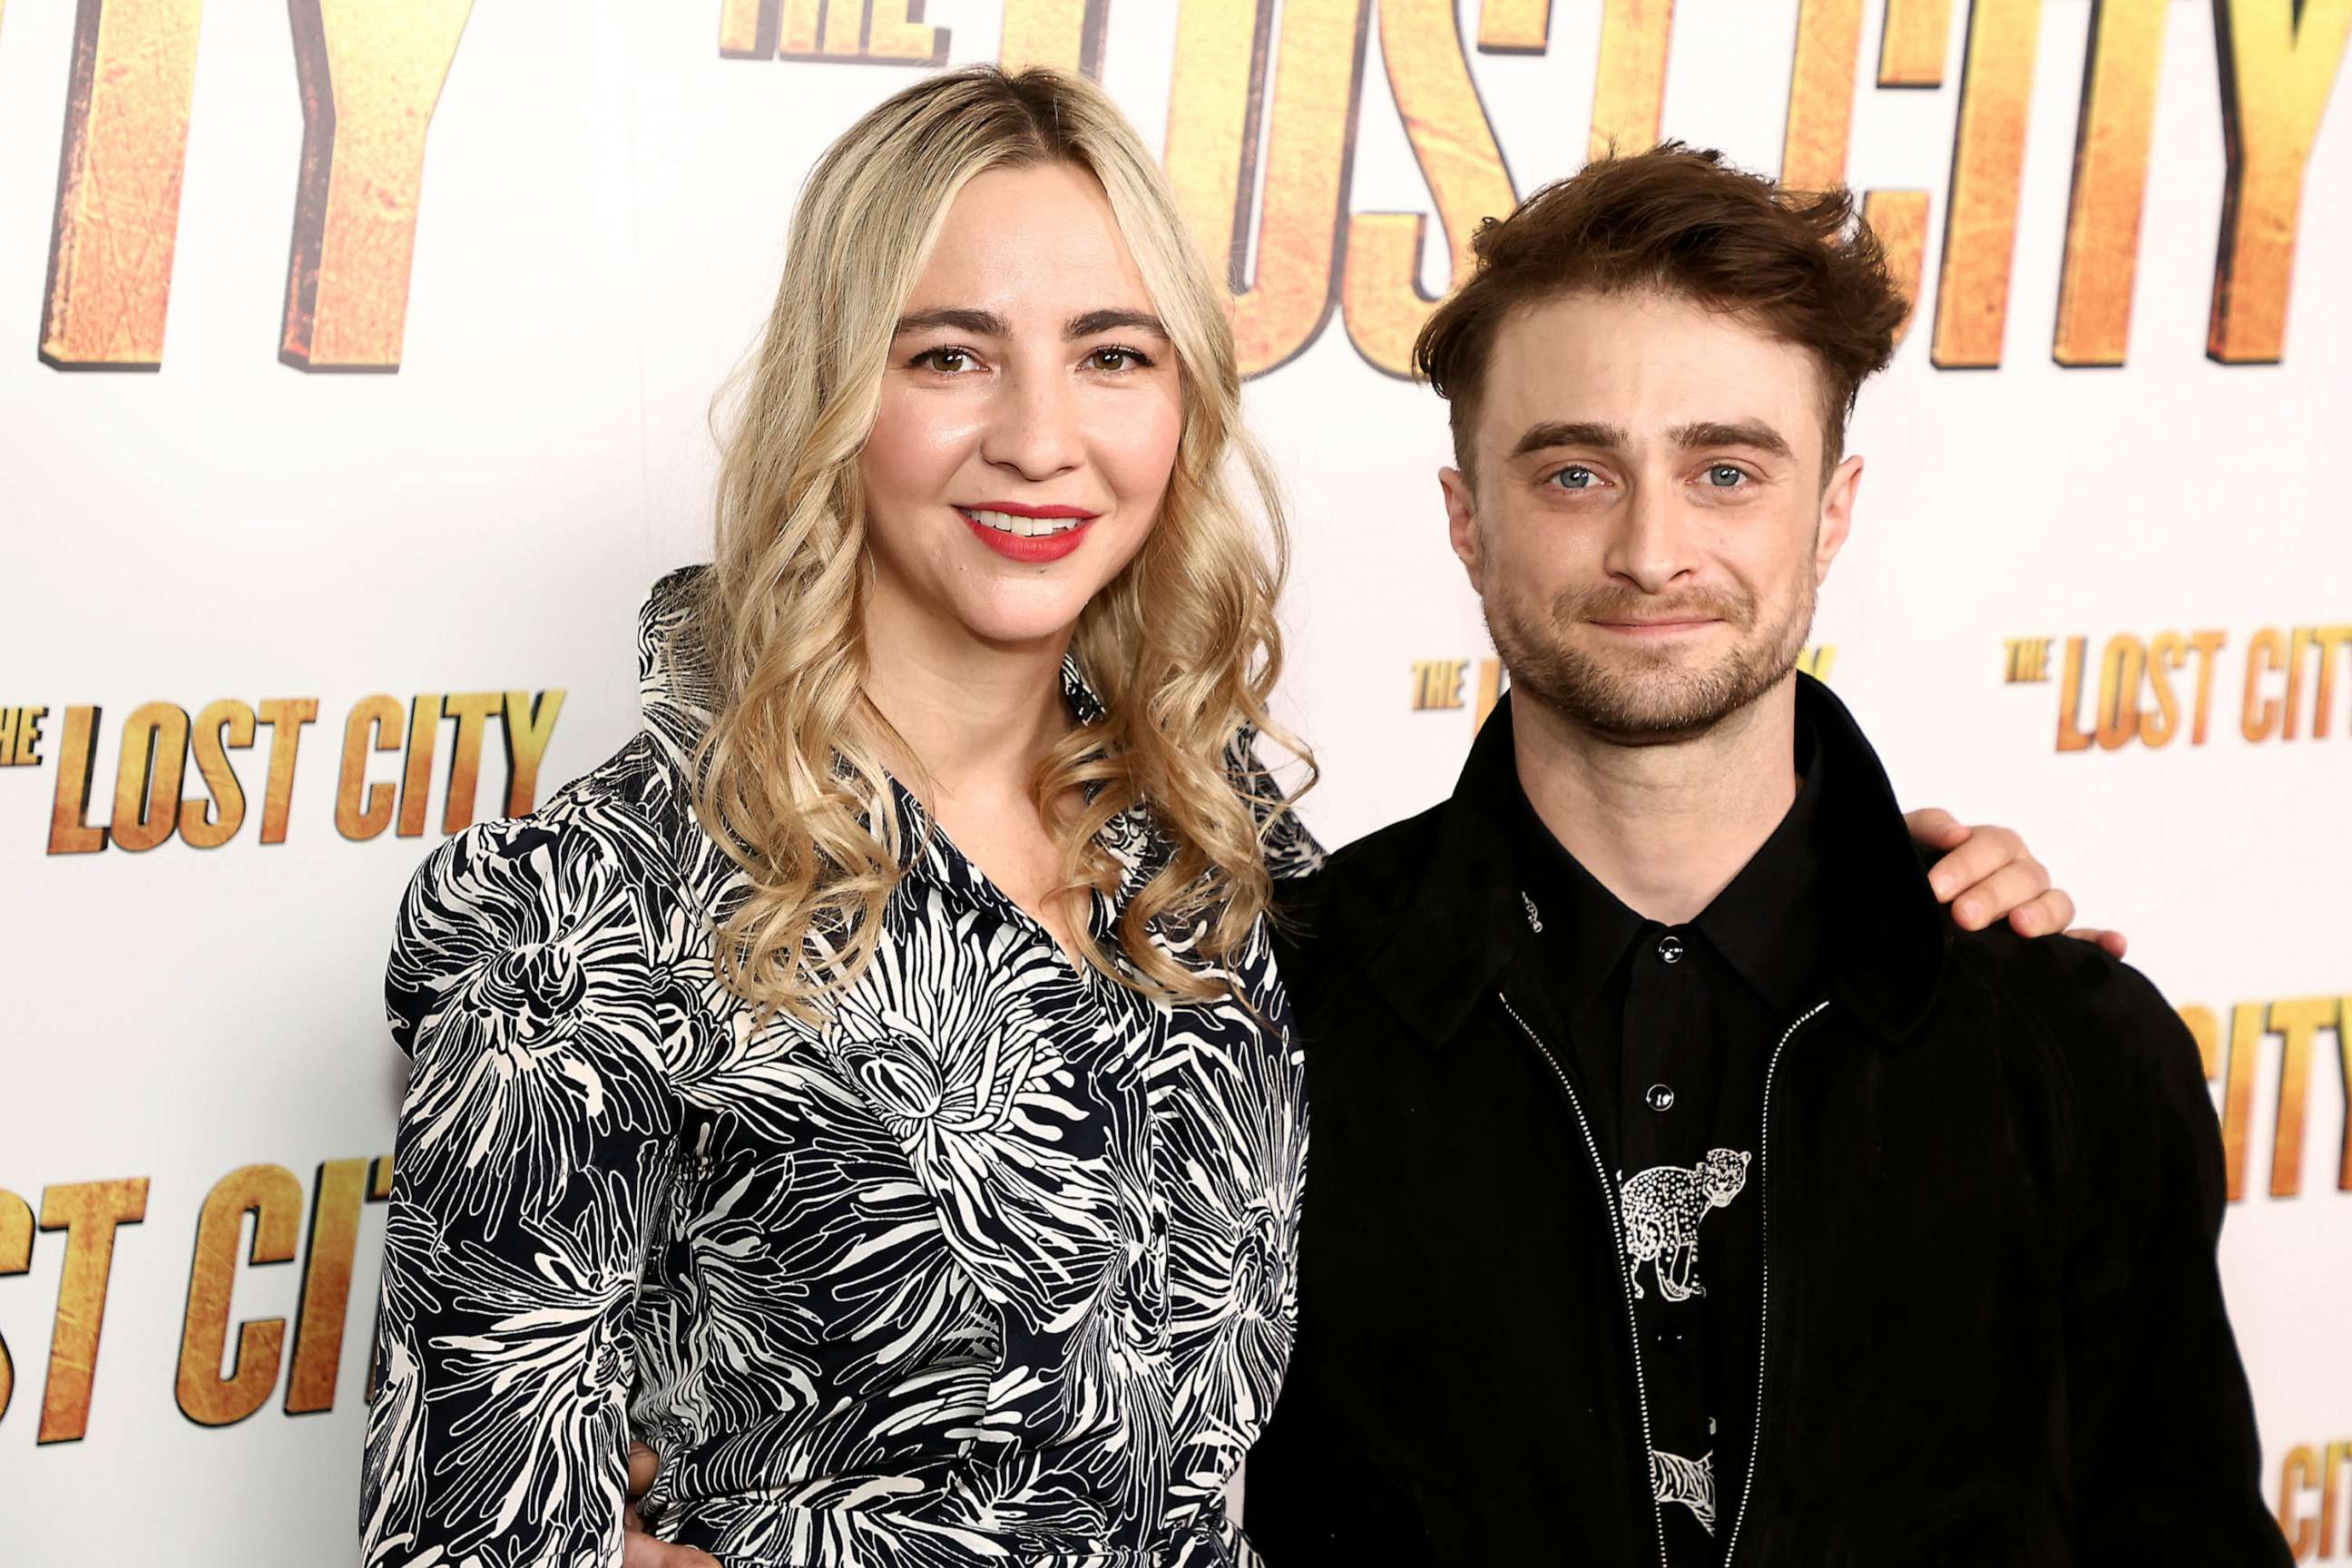 PHOTO: FILE - Erin Darke and Daniel Radcliffe attend a screening of "The Lost City" at the Whitby Hotel, March 14, 2022 in New York City.